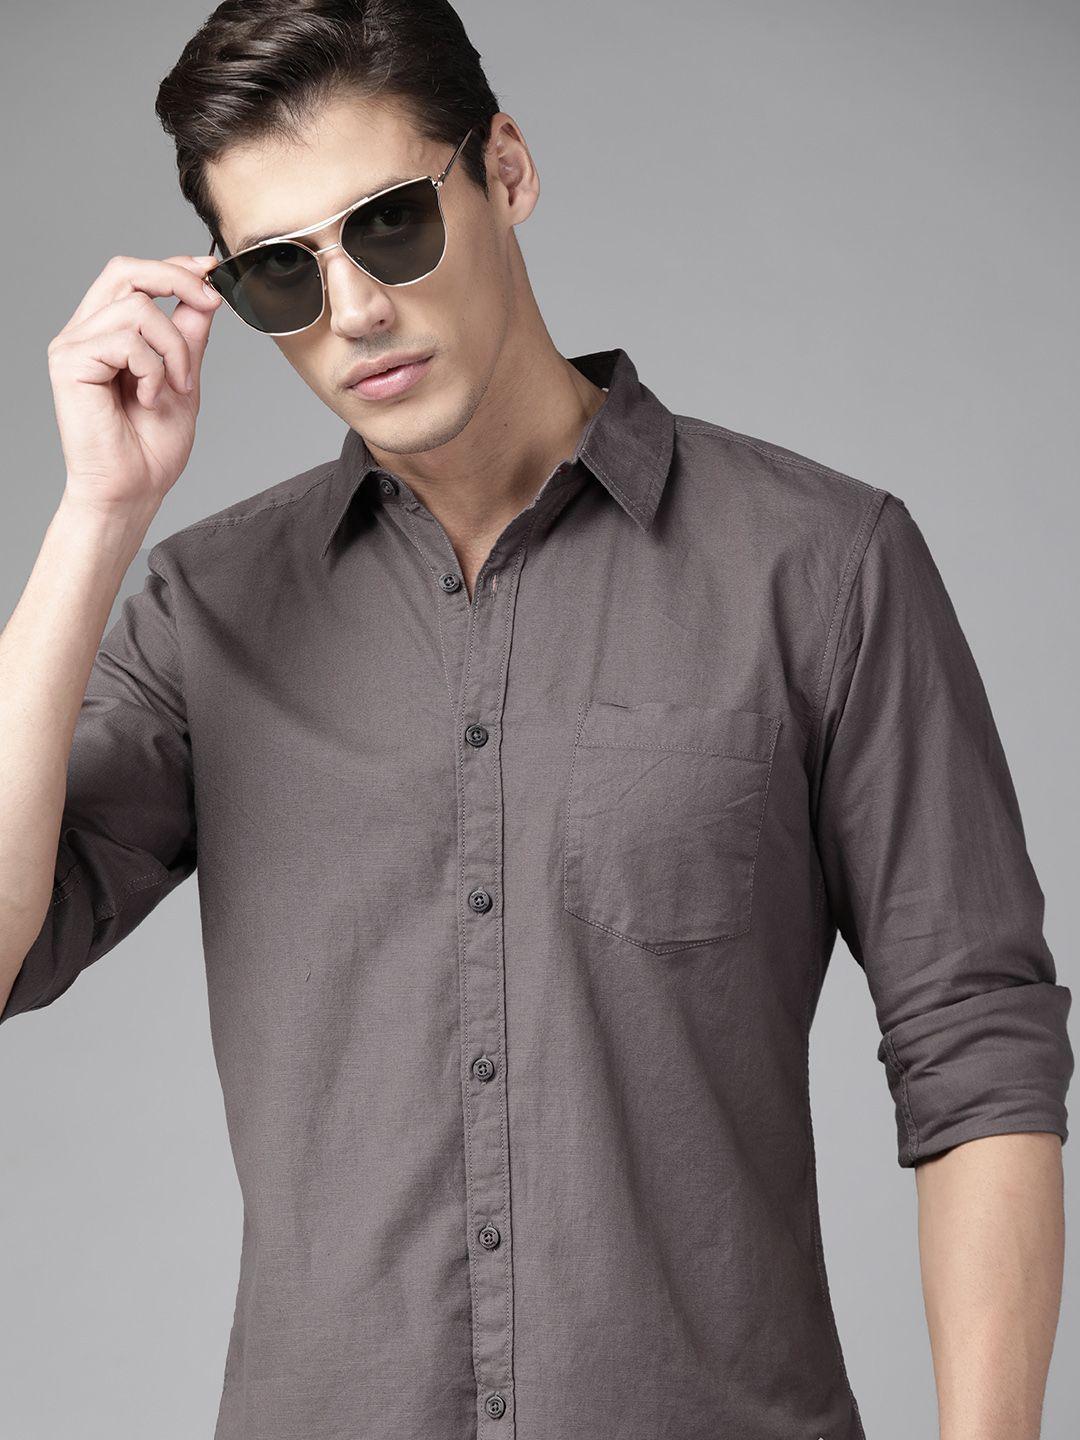 roadster-men-charcoal-grey-pure-cotton-solid-sustainable-casual-shirt